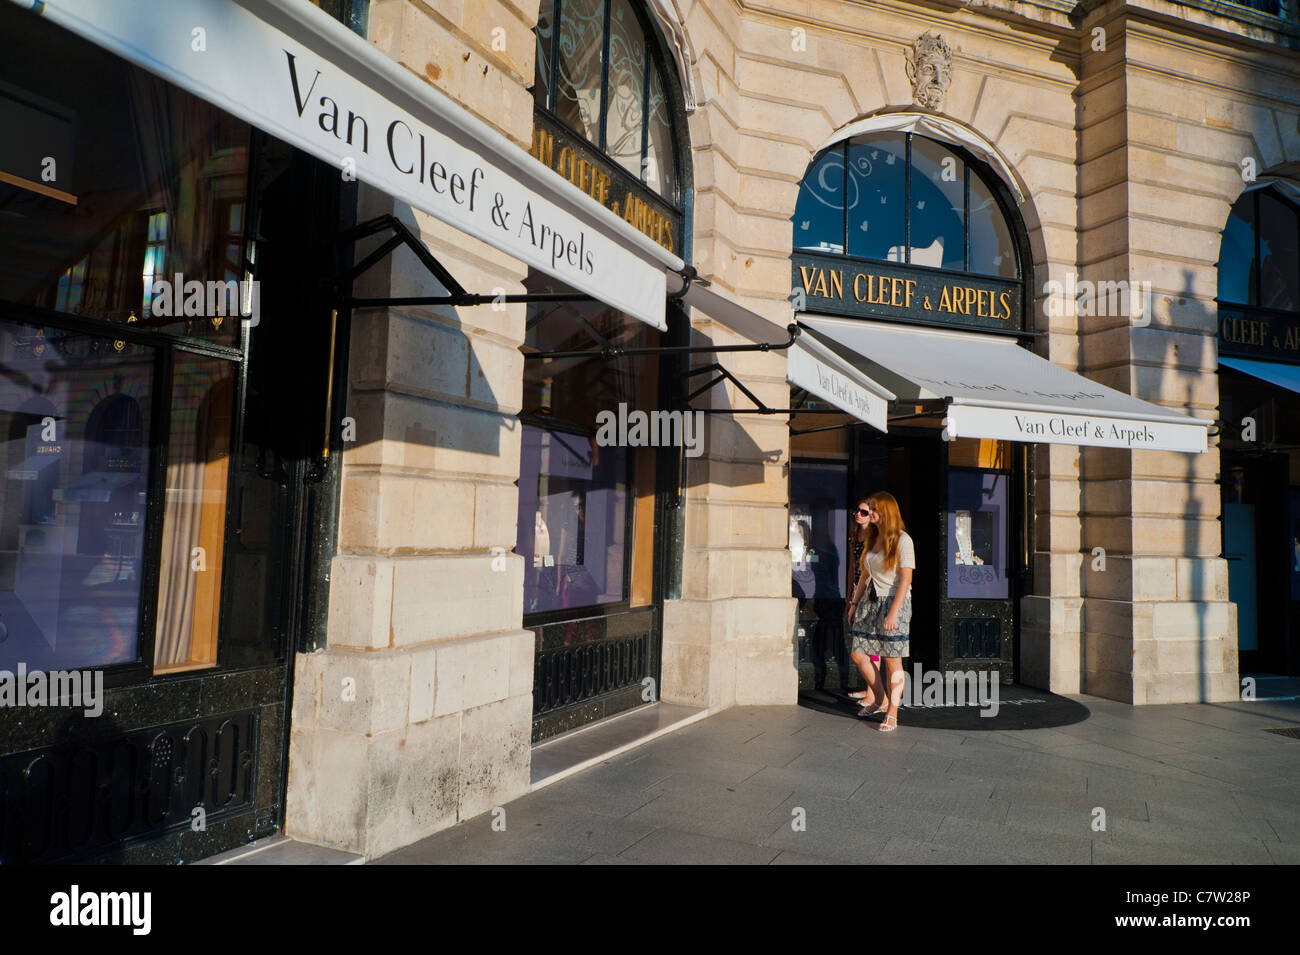 Paris, France, Women Shopping on High Street, Place Vendome, "Van Cleef & Arpels"  Jewelry Brands Shop Fronts, Prestige consumer Stock Photo